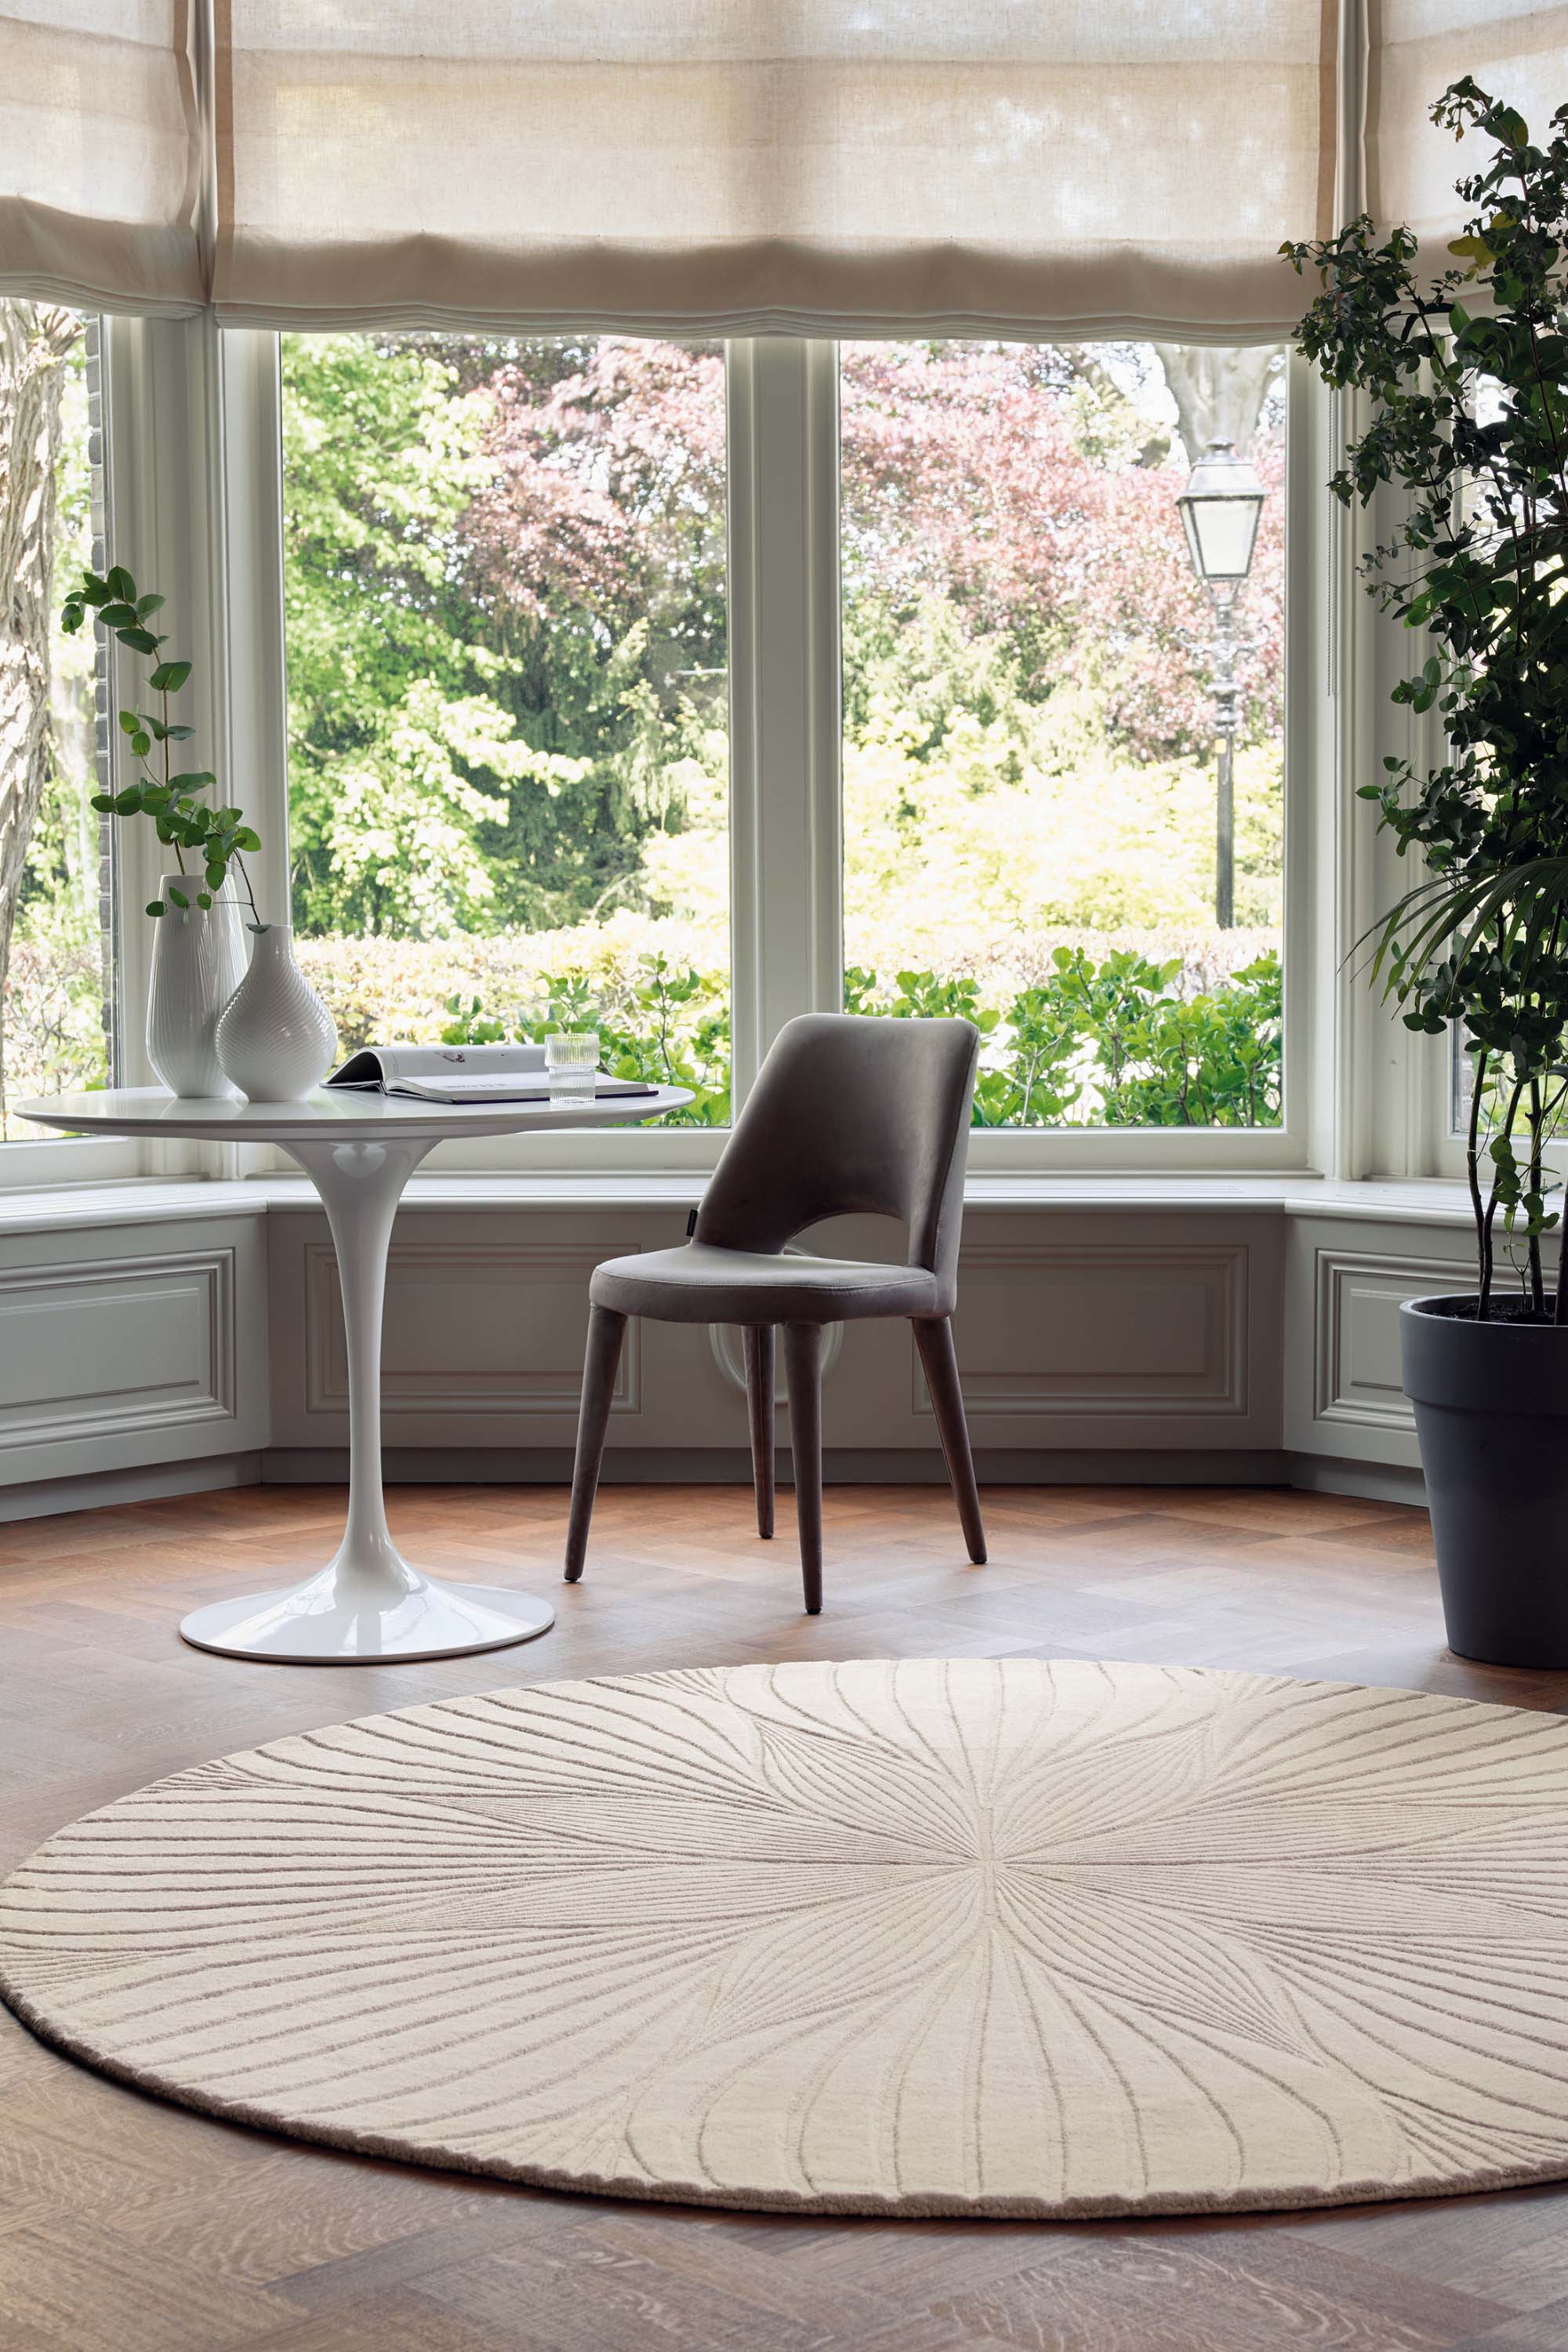 Round beige rug with engraved floral botanical pattern